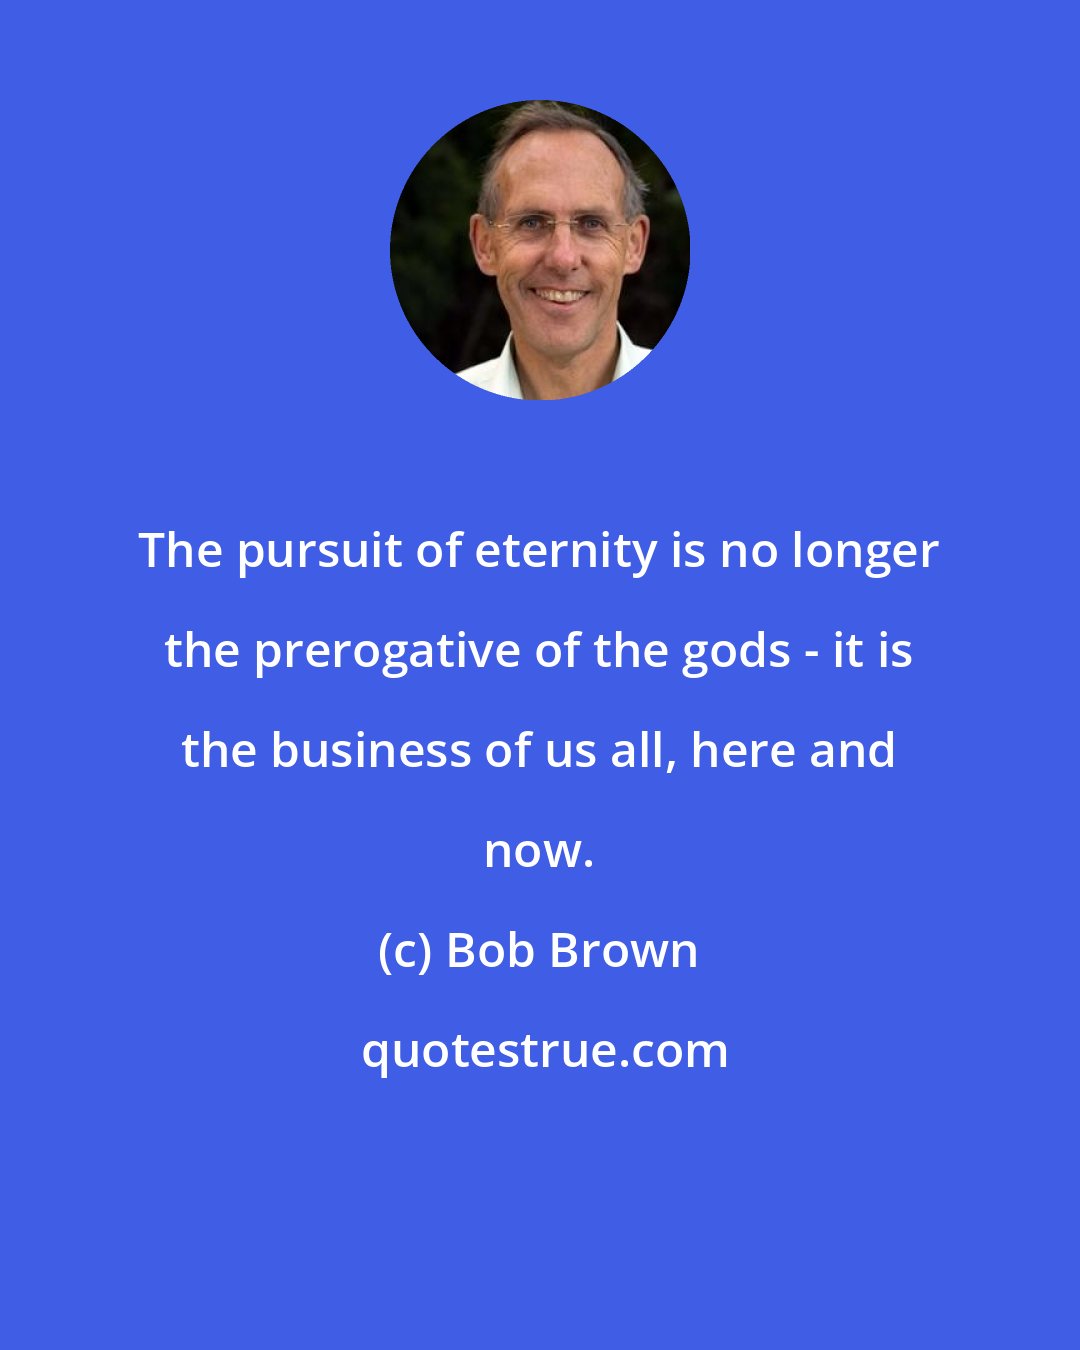 Bob Brown: The pursuit of eternity is no longer the prerogative of the gods - it is the business of us all, here and now.